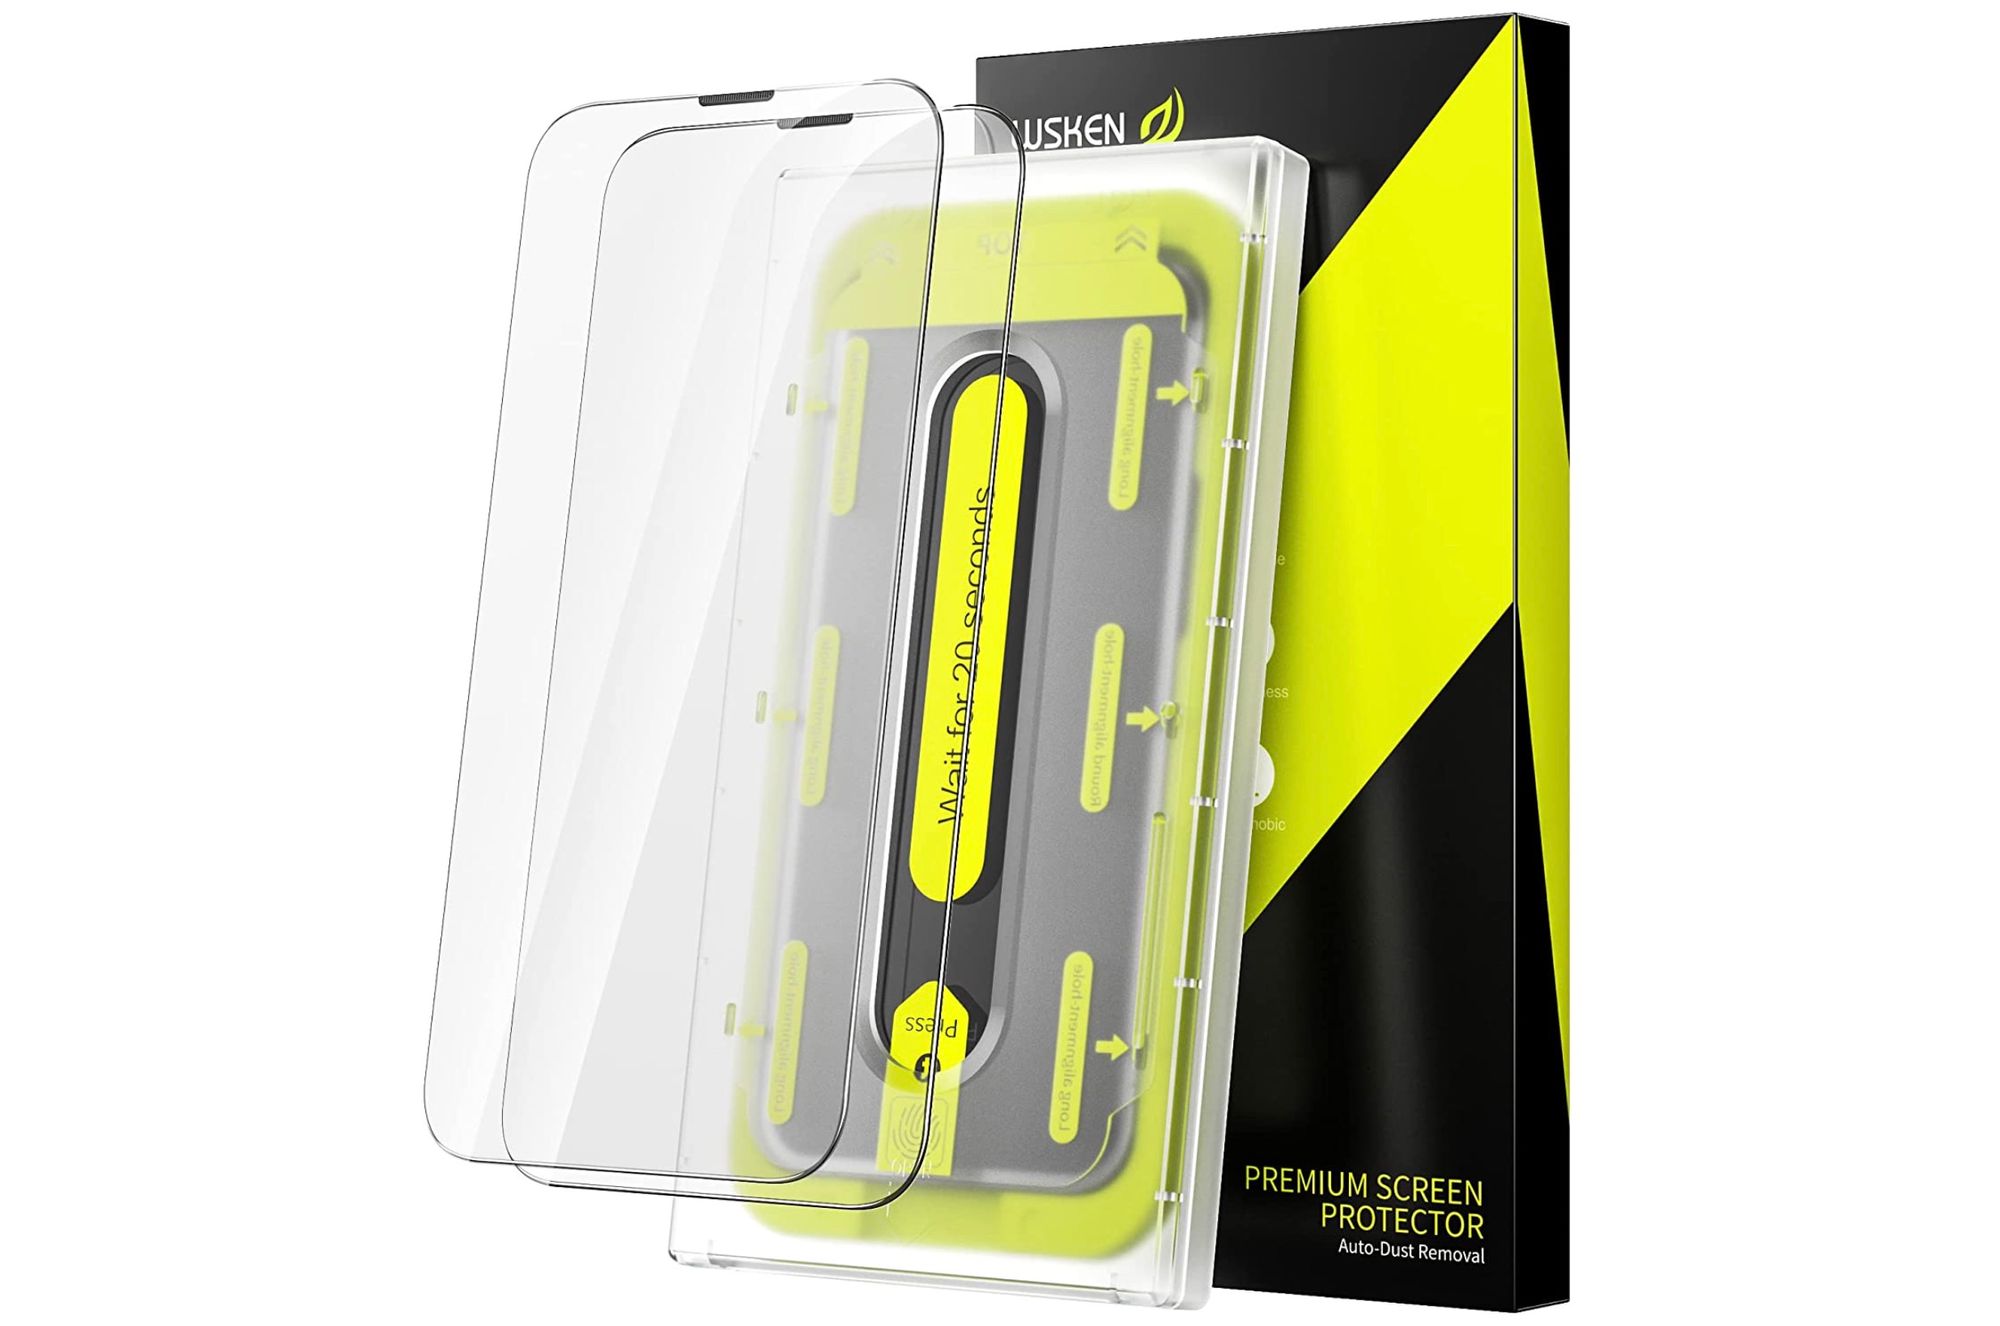  iPhone 14 Pro screen protector by WSKEN